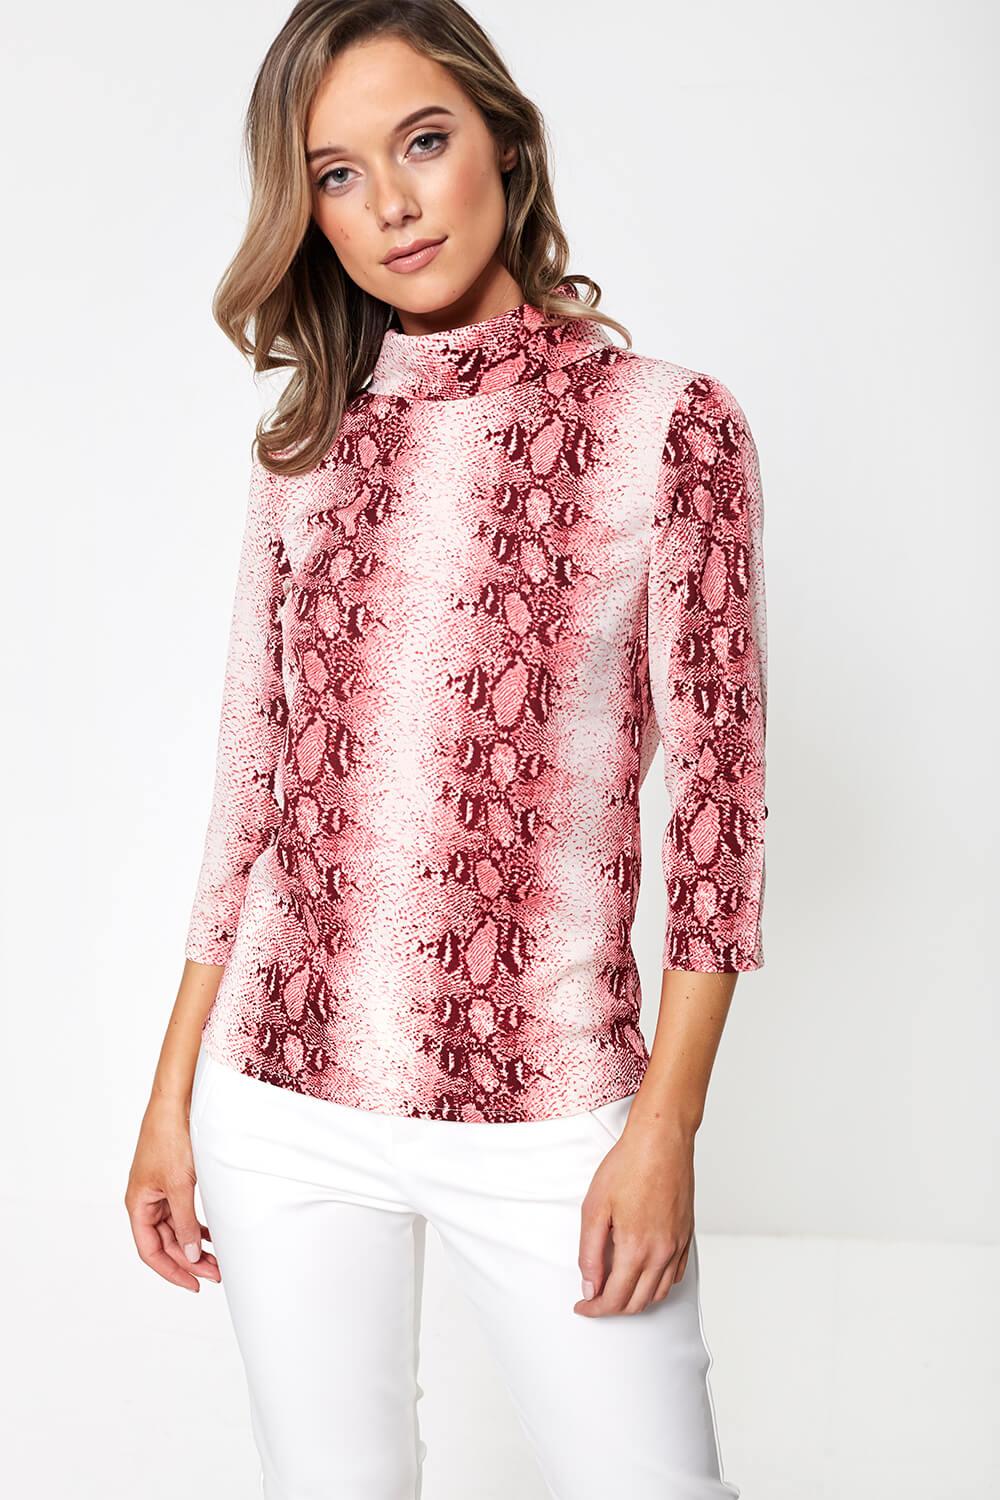 Maisy Lexi High Neck Top in Pink 